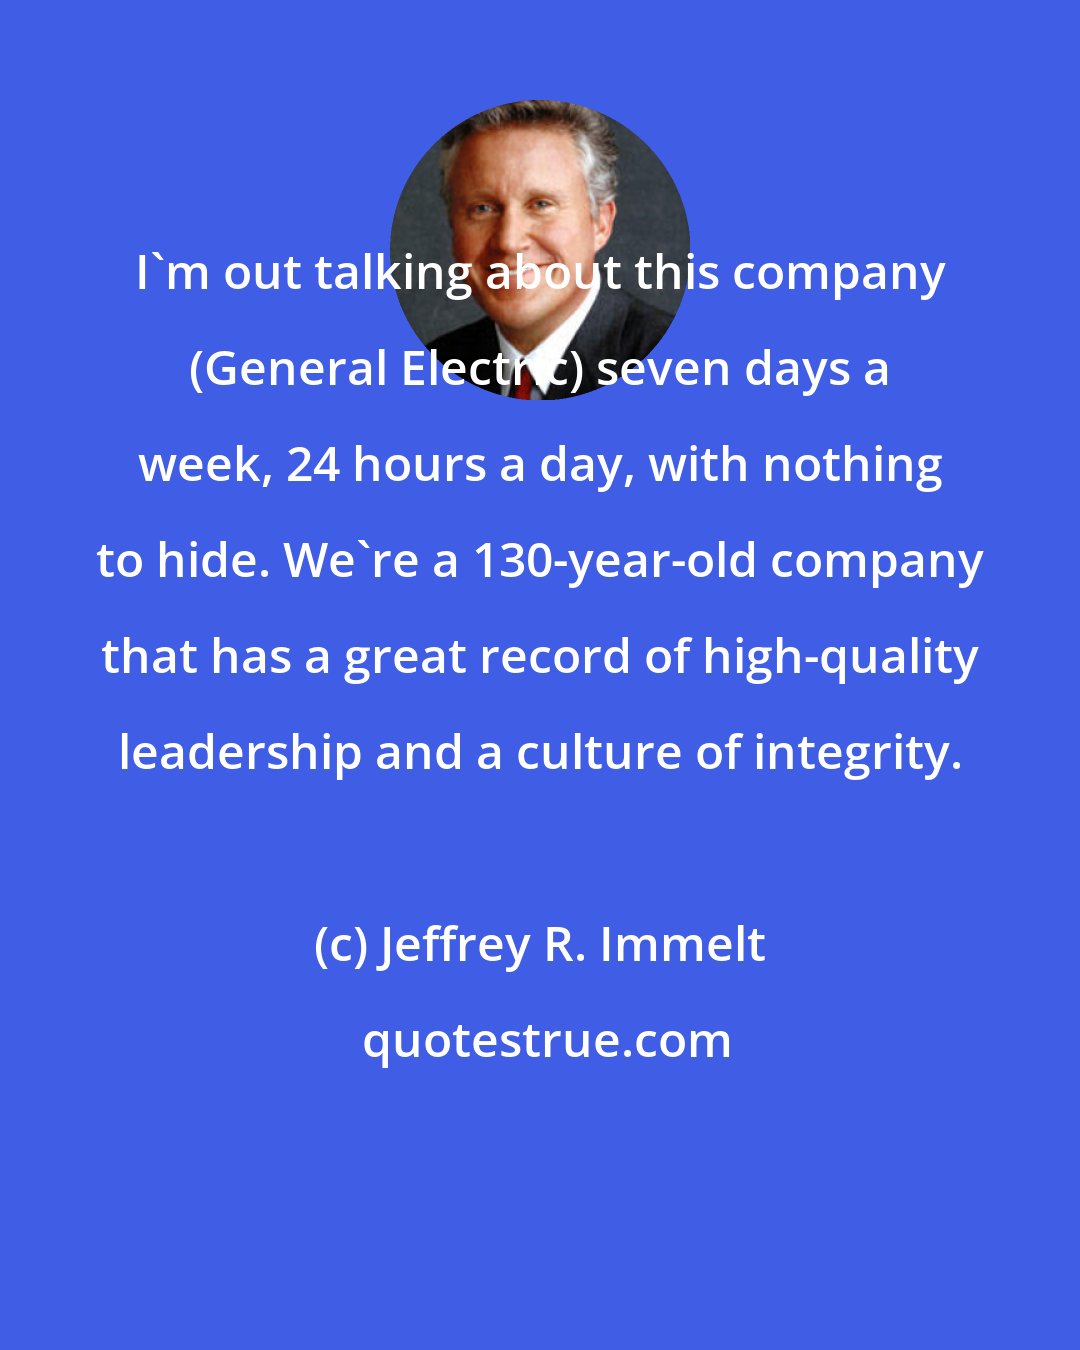 Jeffrey R. Immelt: I'm out talking about this company (General Electric) seven days a week, 24 hours a day, with nothing to hide. We're a 130-year-old company that has a great record of high-quality leadership and a culture of integrity.